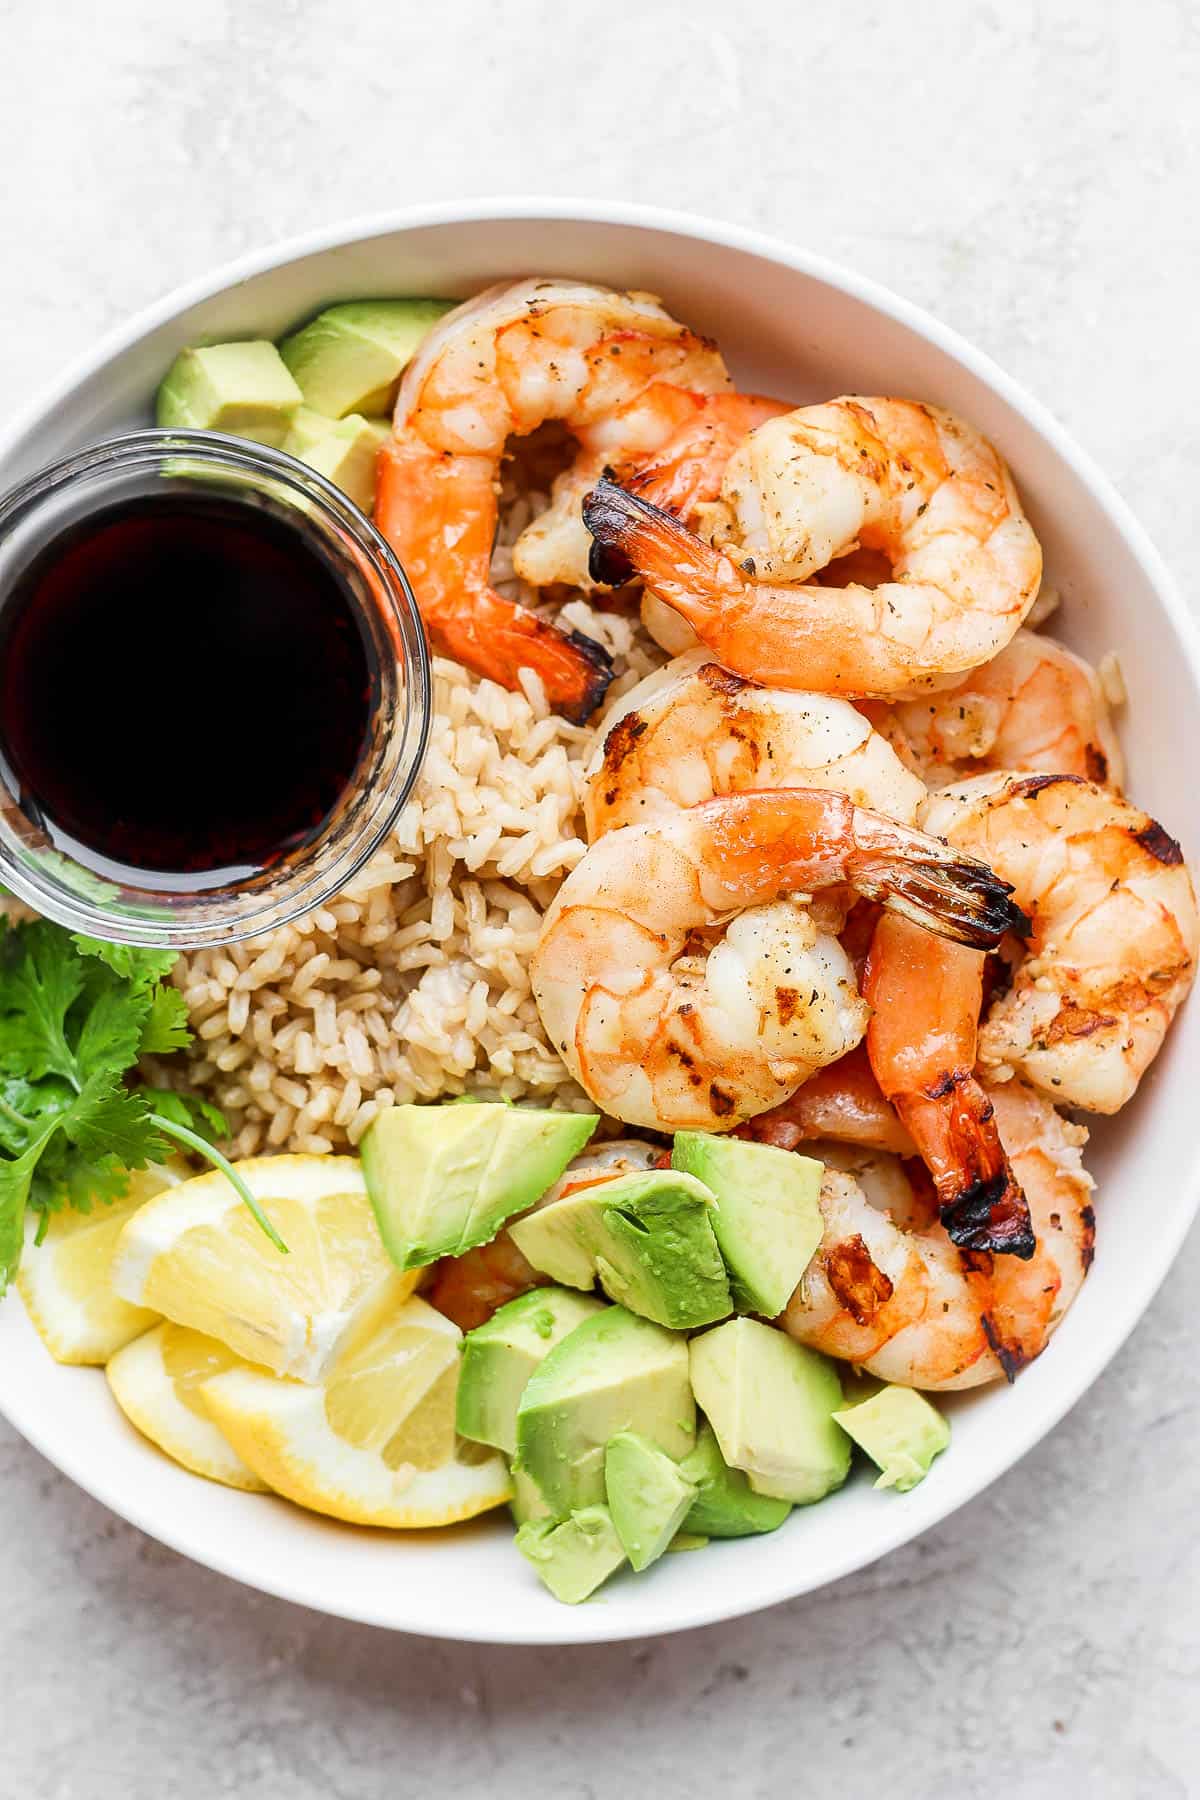 Shrimp rice bowl with a dish of soy sauce.